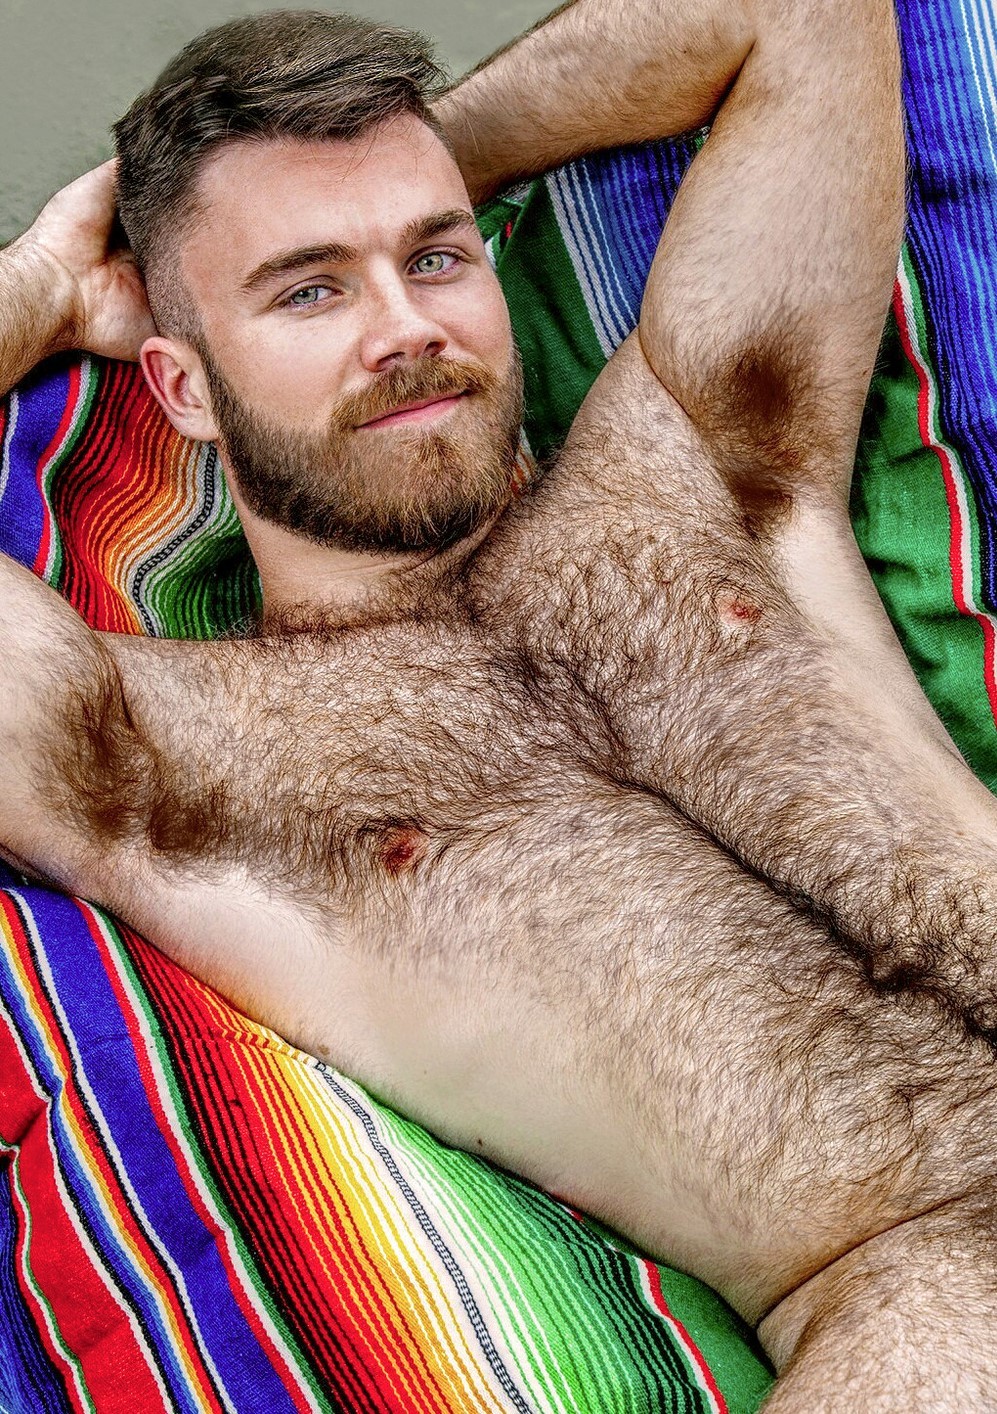 Hairy chested men tumblr